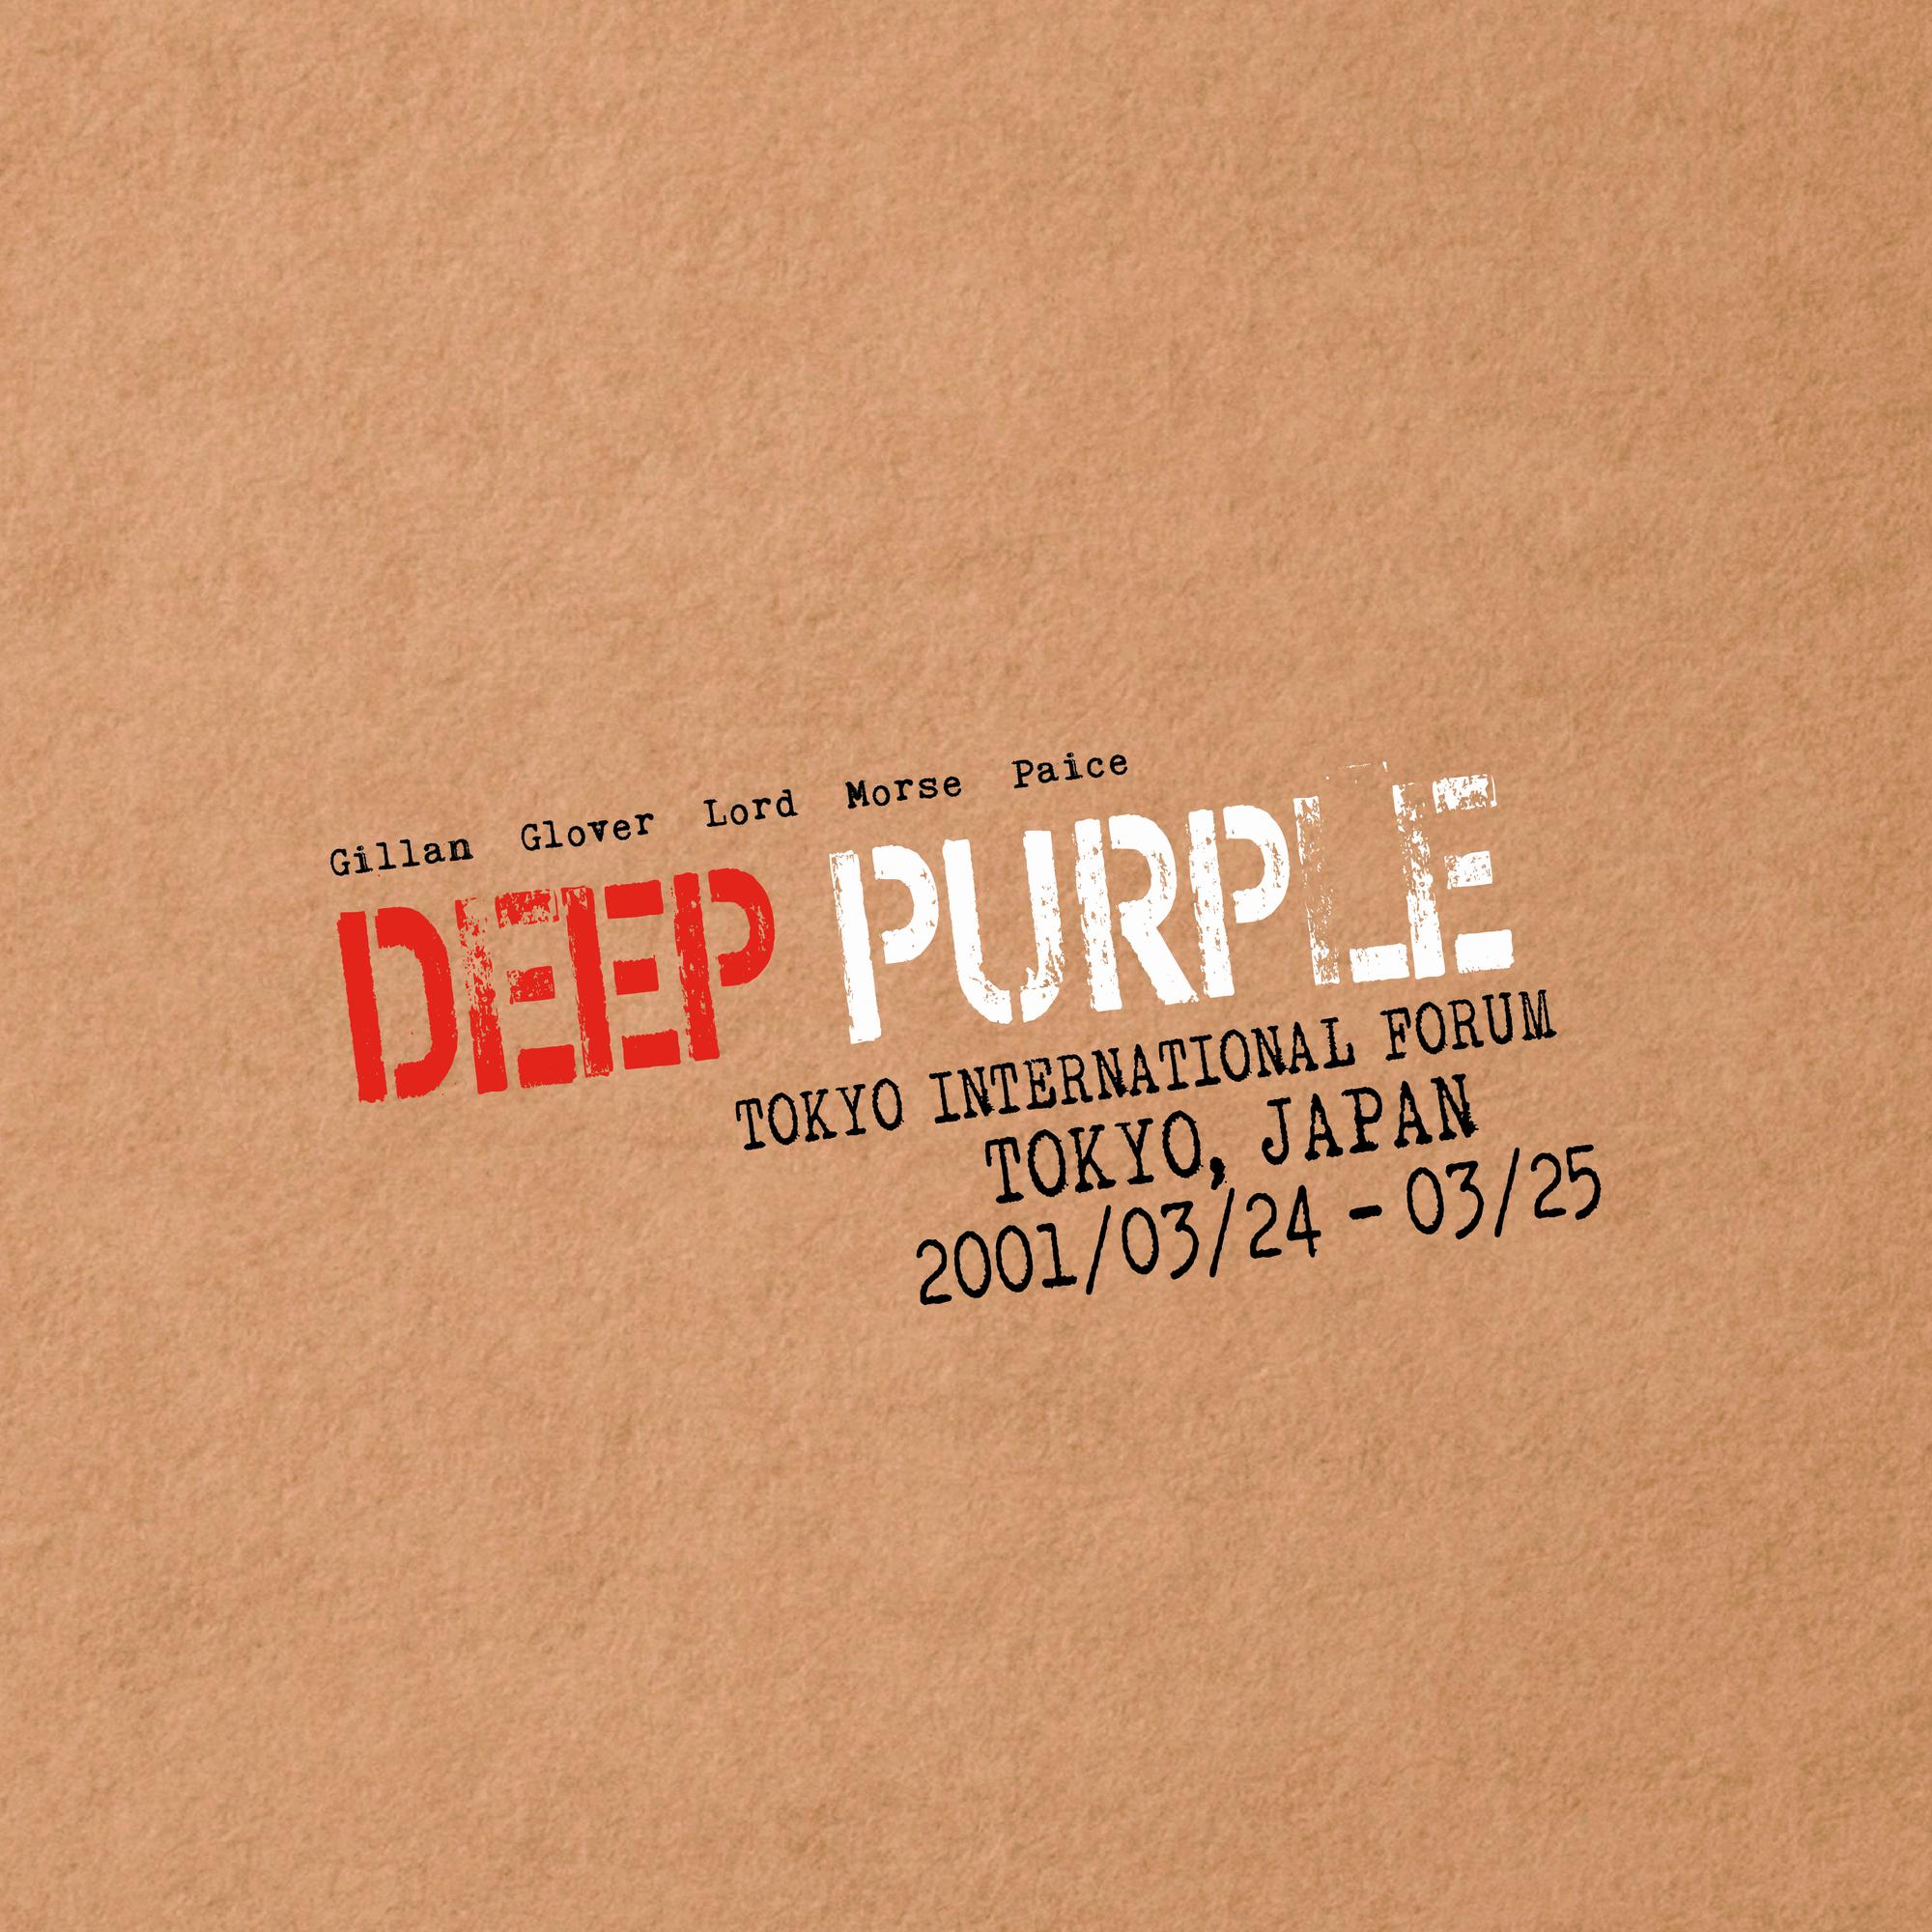 DEEP PURPLE 'LIVE IN TOKYO 2001' 4LP (Limited Edition, Red & Clear 'Flag of Japan' Vinyl)